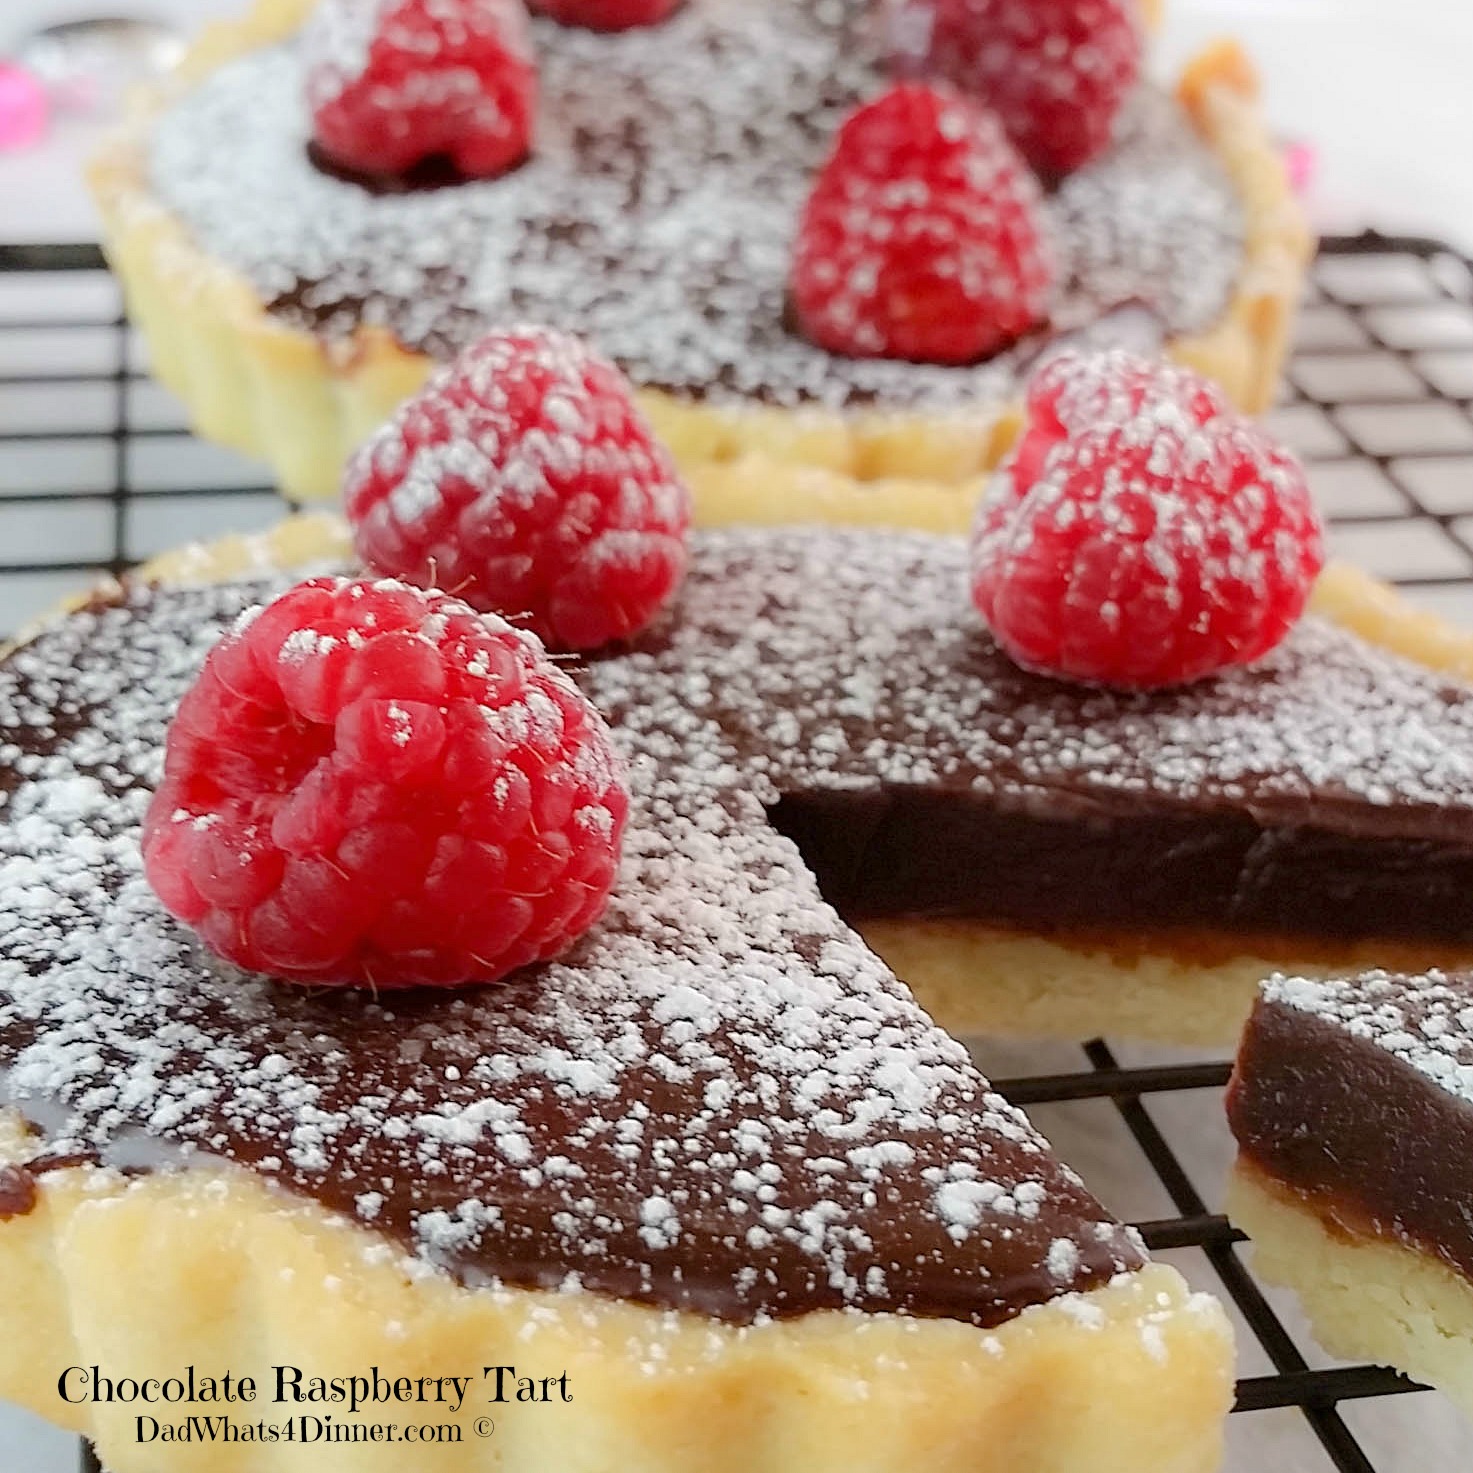 If you want to impress your significant other, make this Chocolate Raspberry Tart. The ultimate Valentine's Day dessert! | http://dadwhats4dinner.com